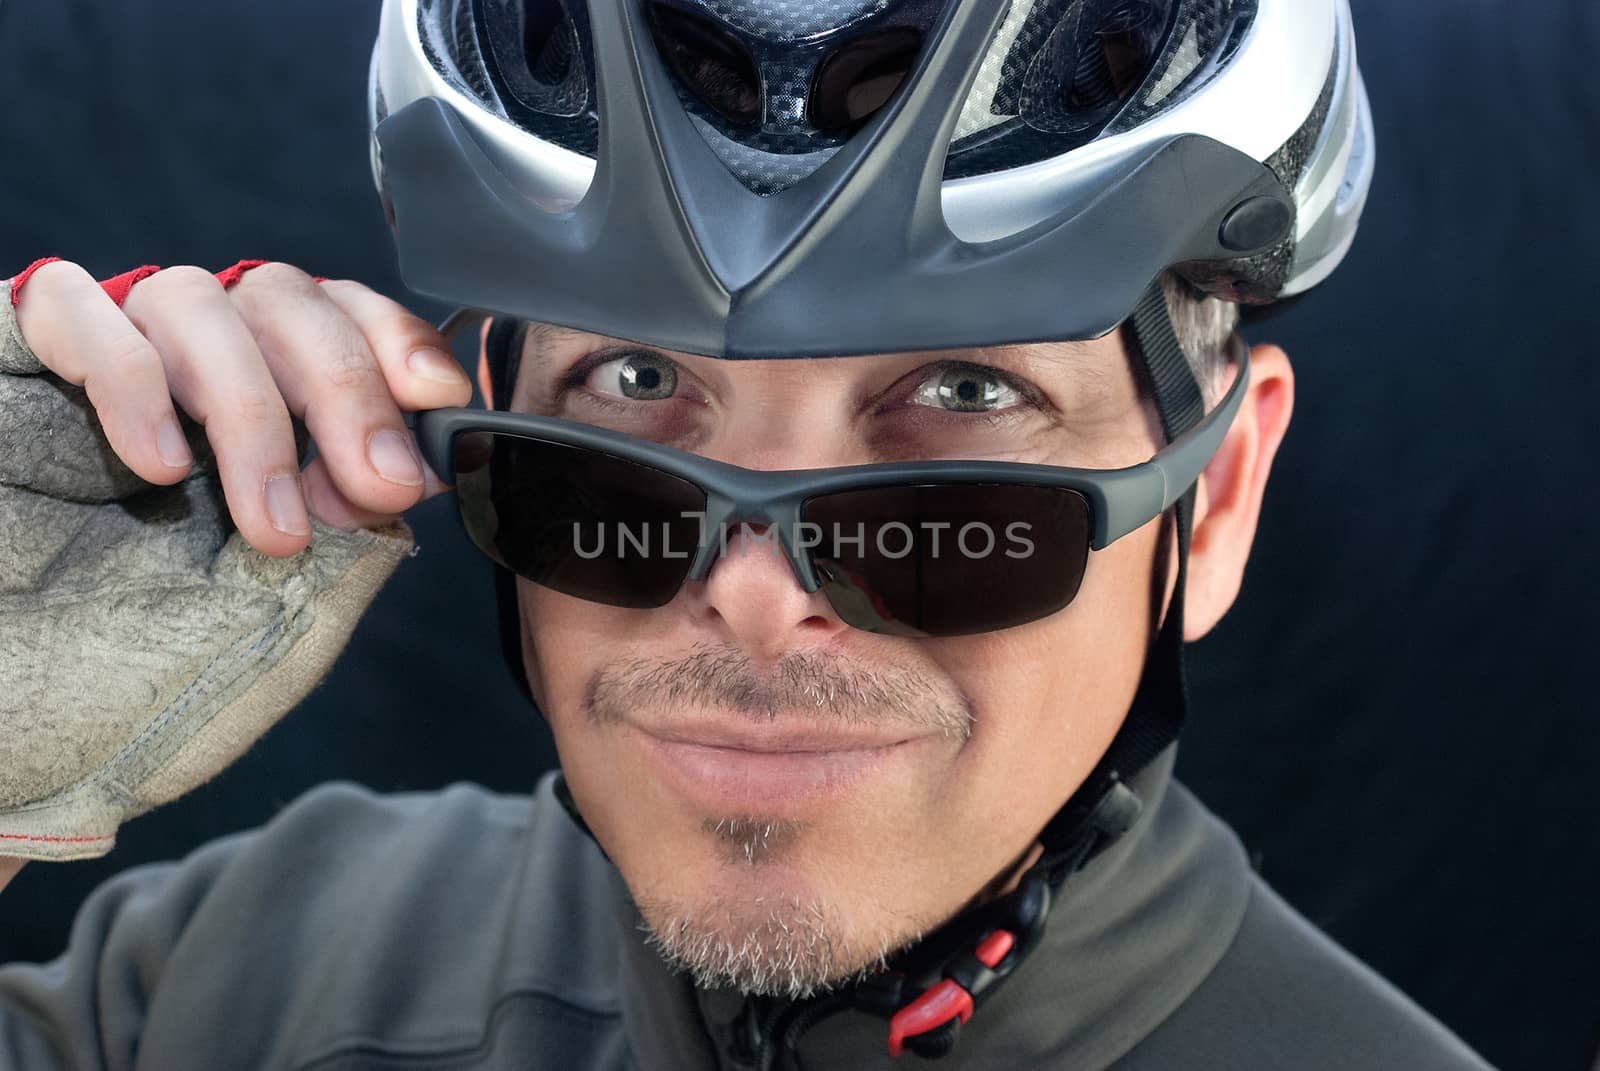 Friendly Bicycle Courier Looks Over Sunglasses by jackethead